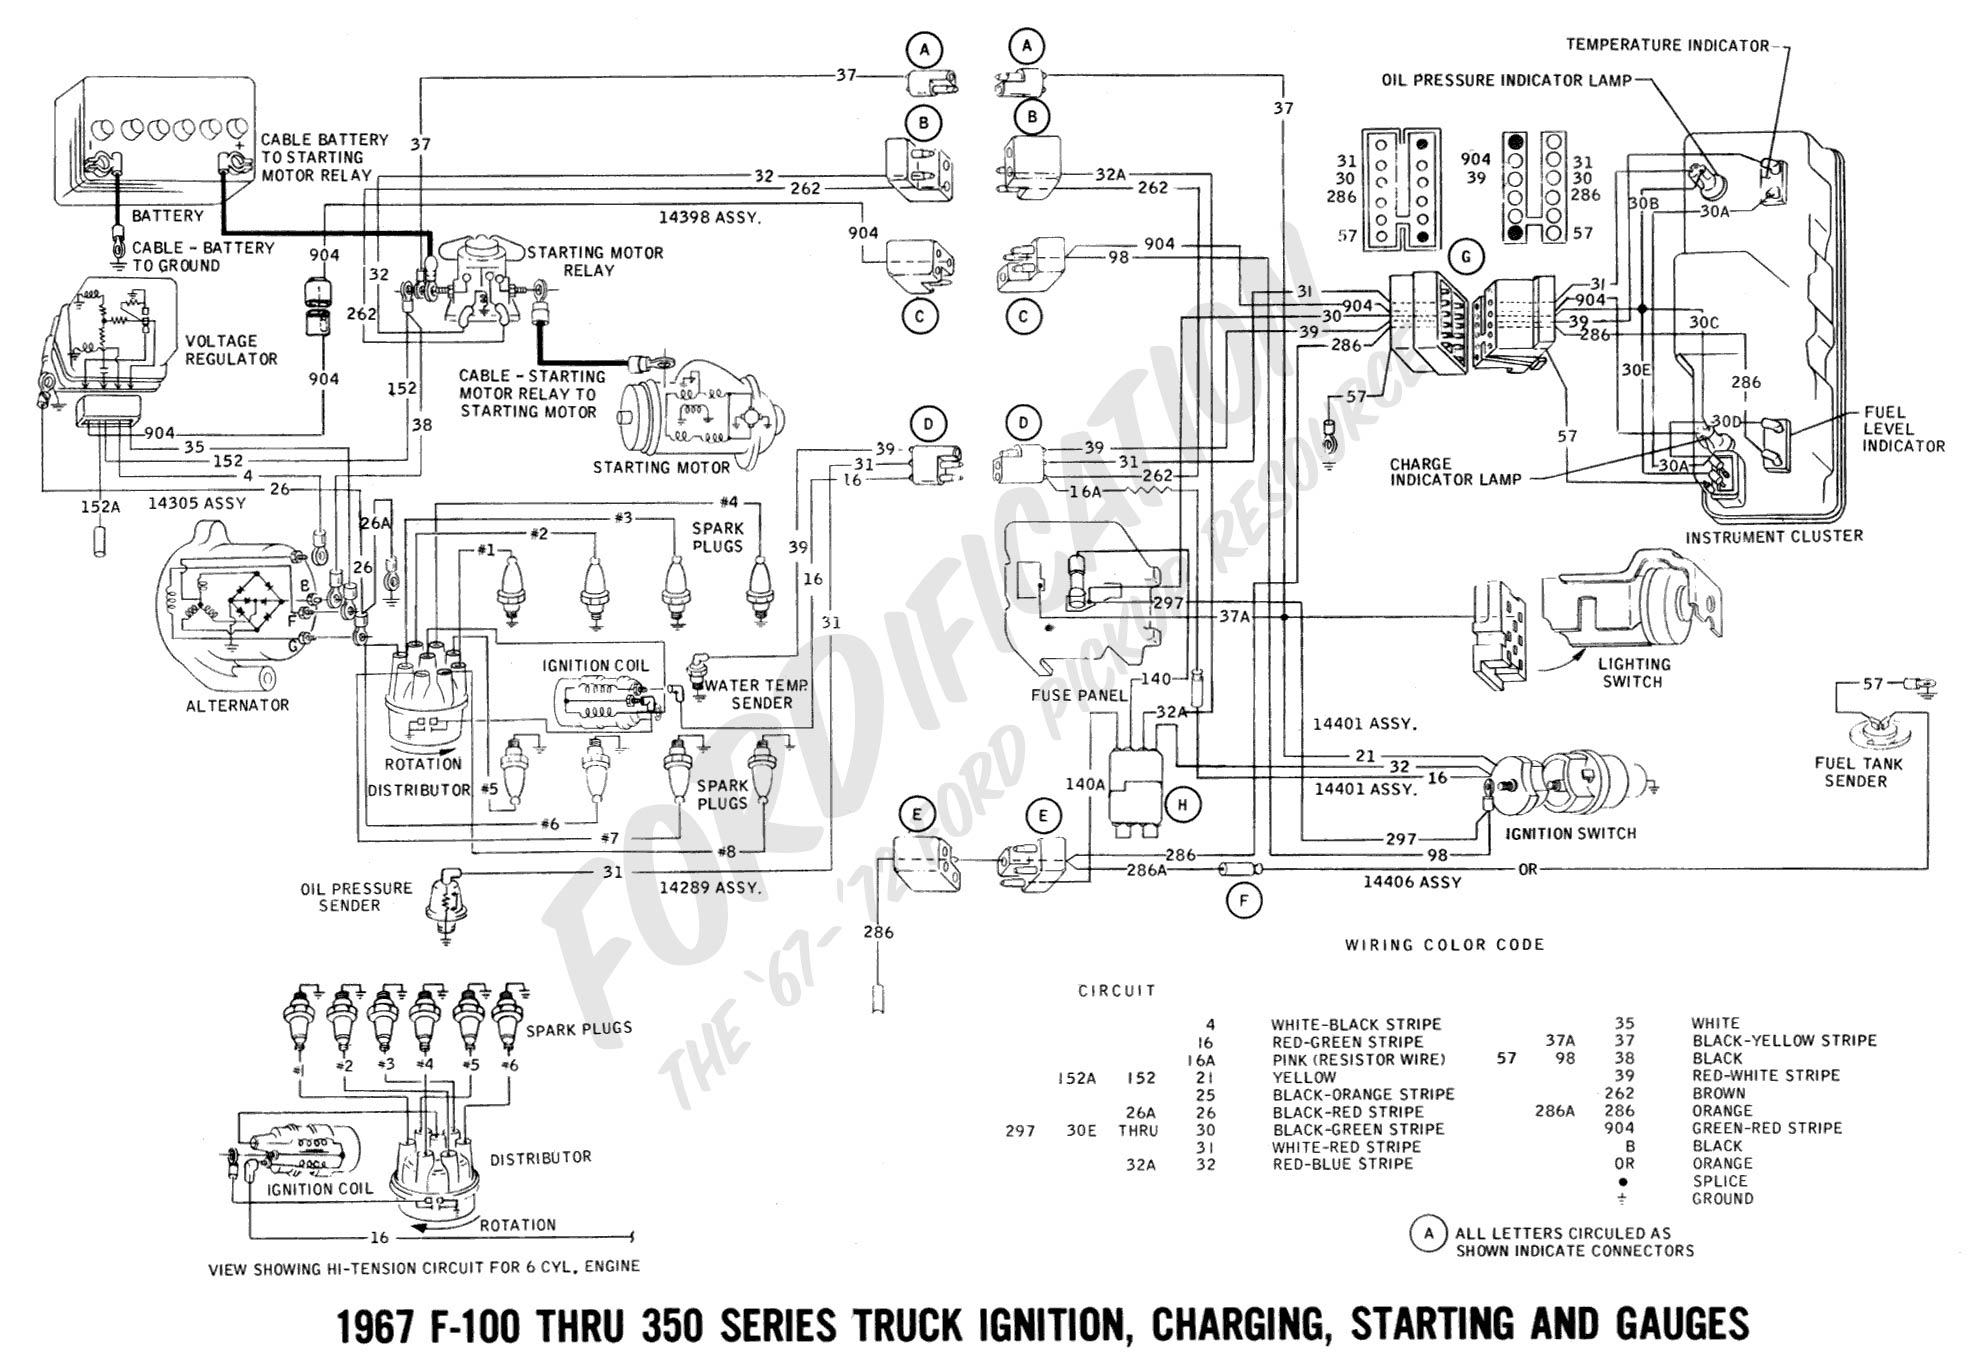 Ford Truck Technical Drawings and Schematics - Section H - Wiring Diagrams  1987 Ford F150 Chassis Wiring Diagram    FORDification.com